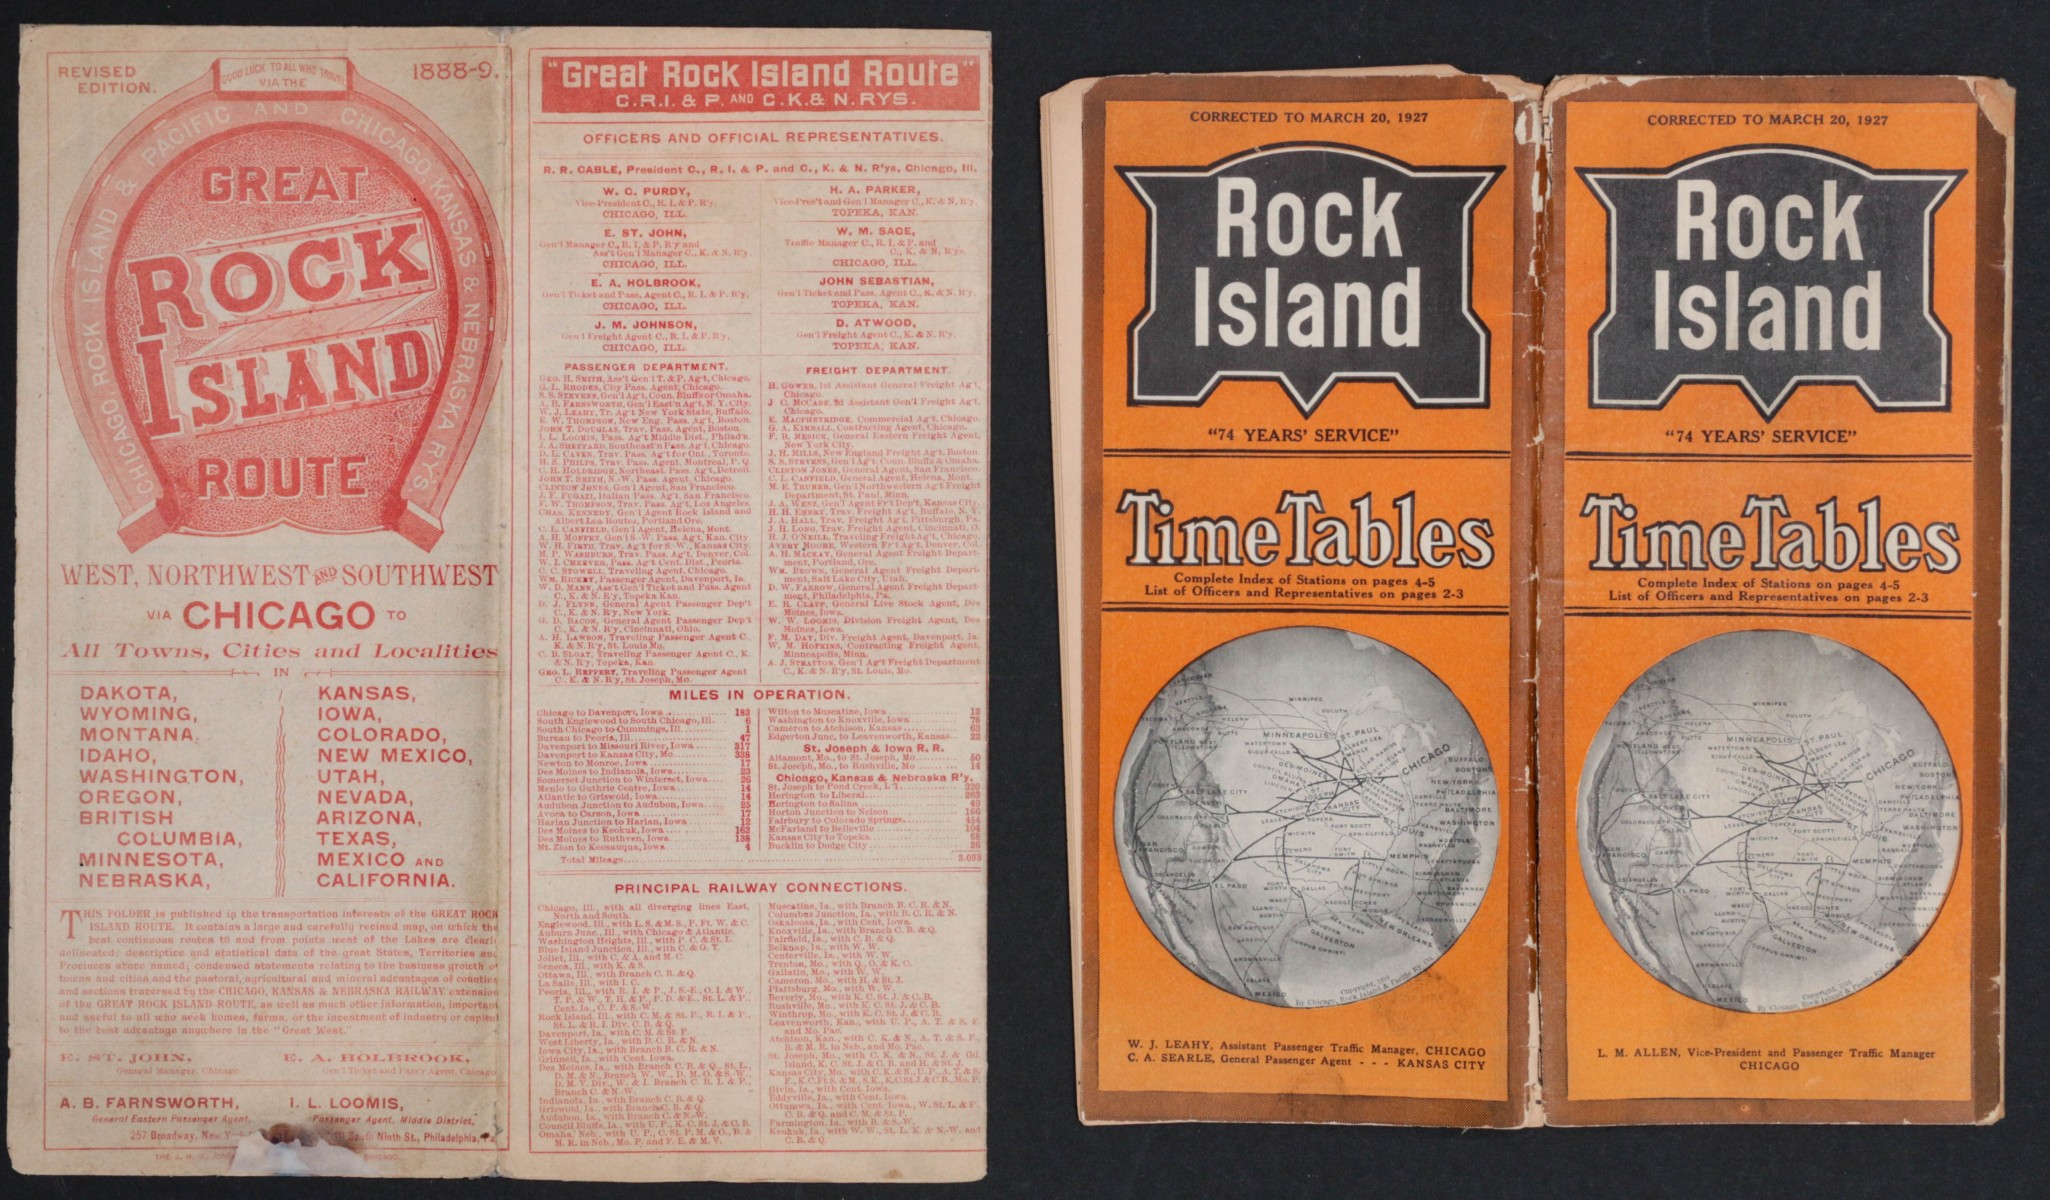 ROCK ISLAND RR TIMETABLES MARCH 1927 & REV ED NO DATE